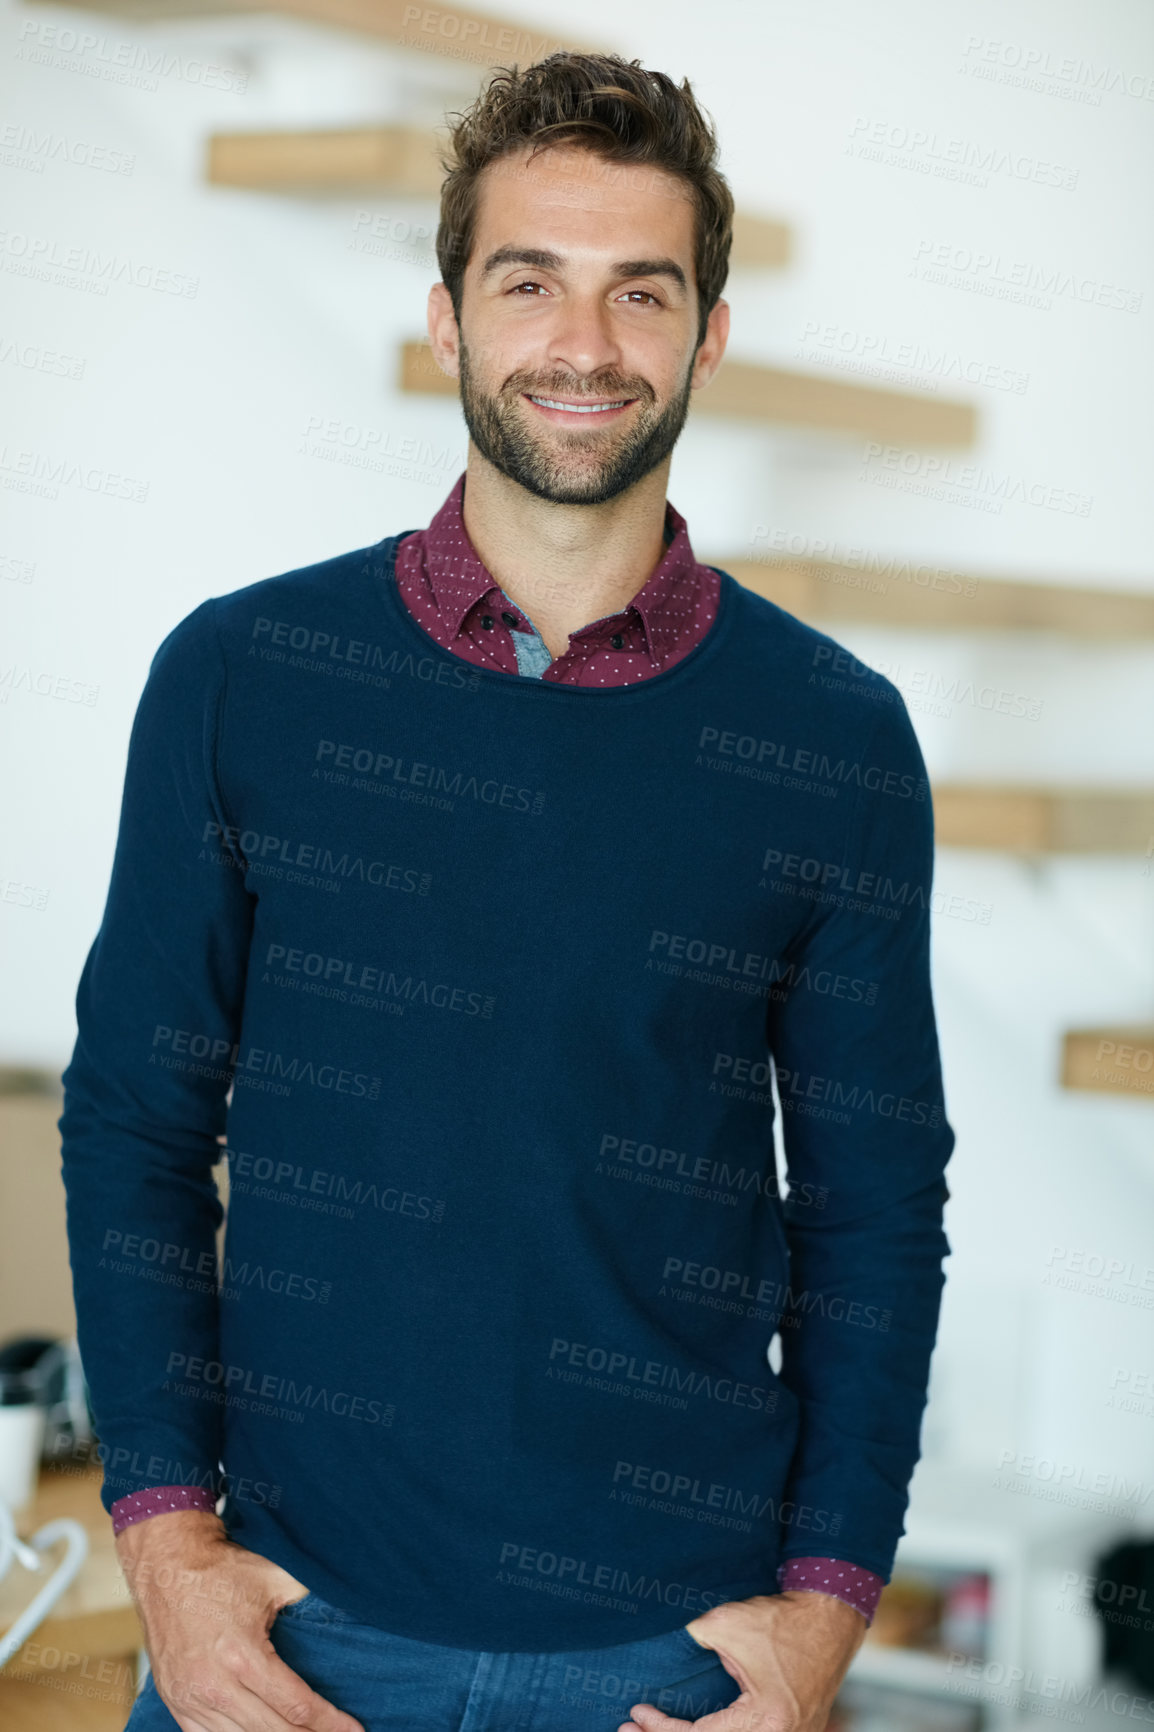 Buy stock photo Portrait of a happy creative businessman standing in his office